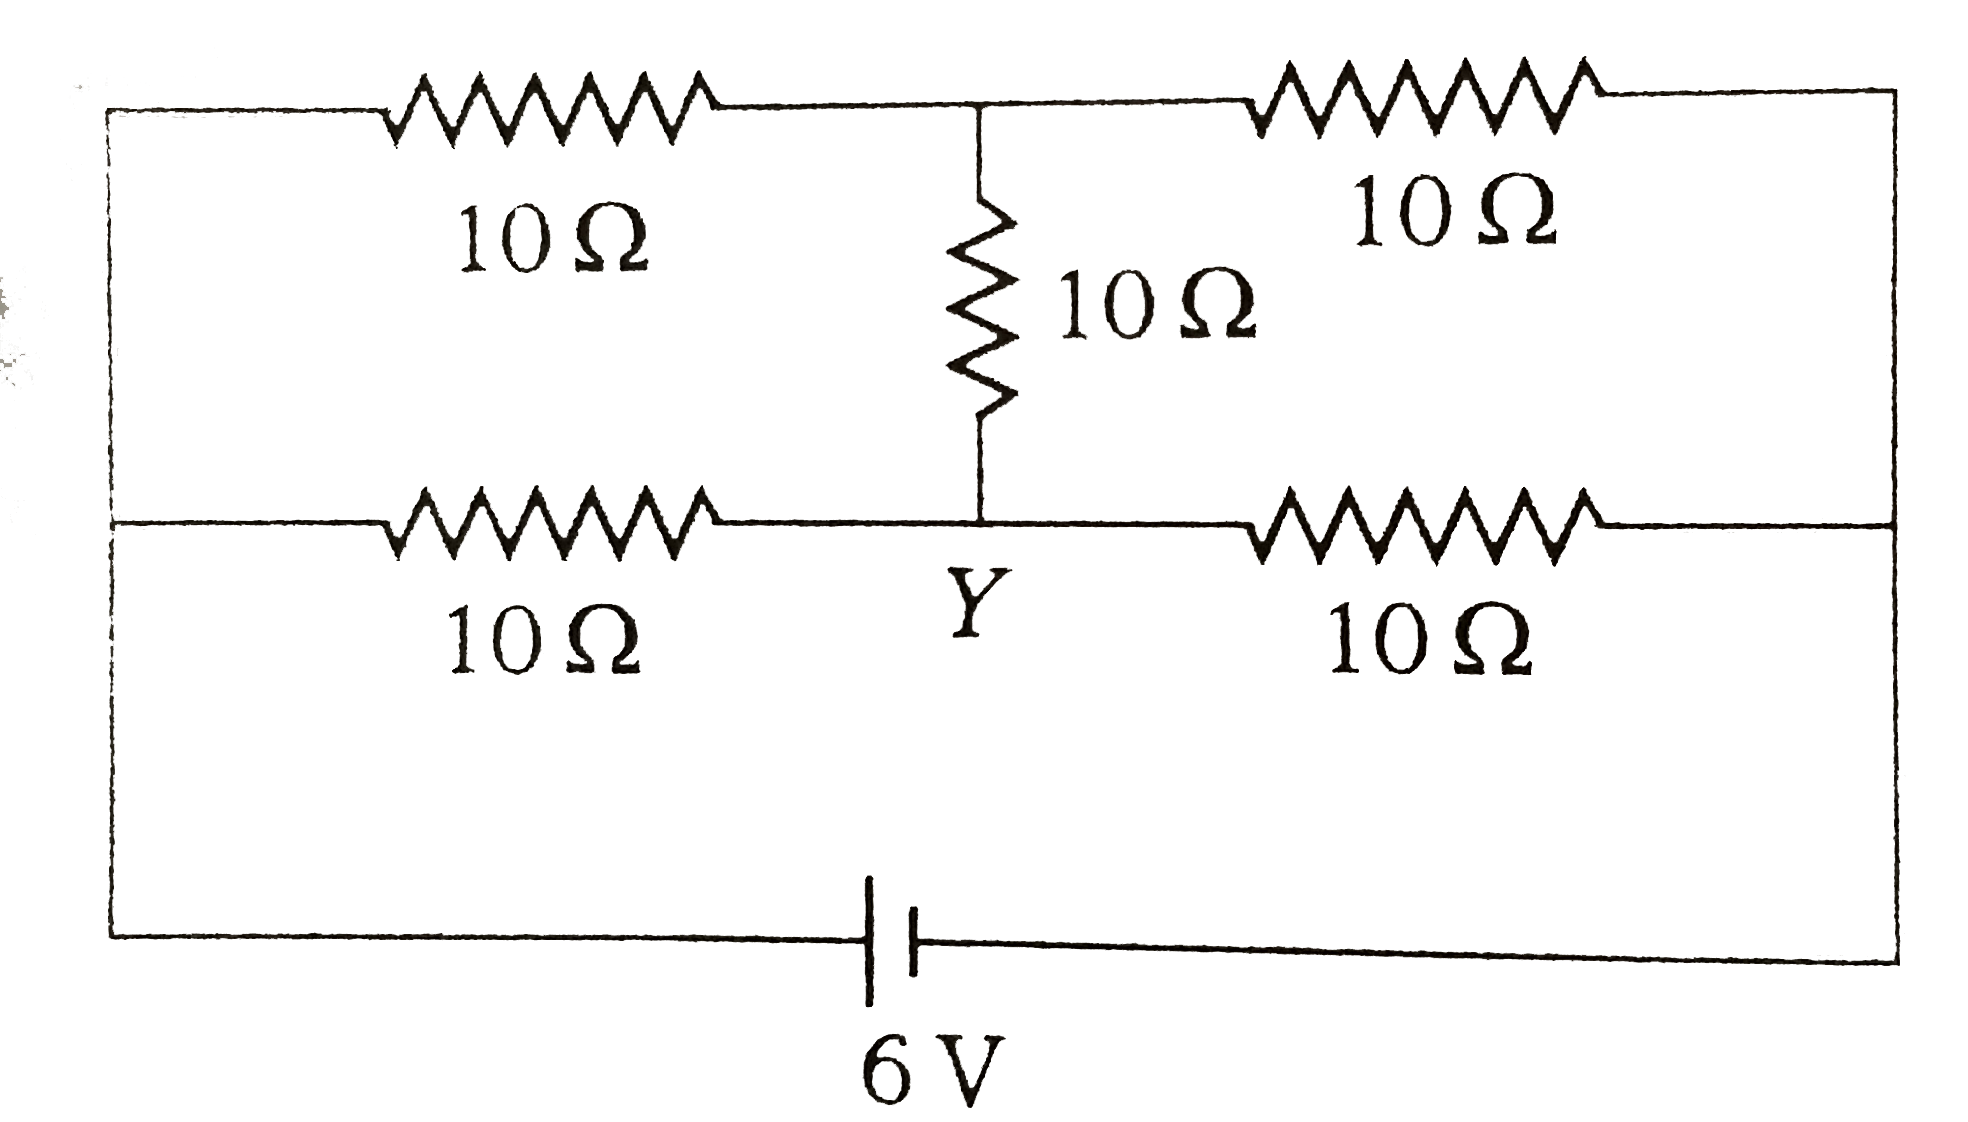 Each resistor shown in the figure has a resistance of 10 Omega and the battery has the emf 6 V. What will be the current supplied by the battery ?